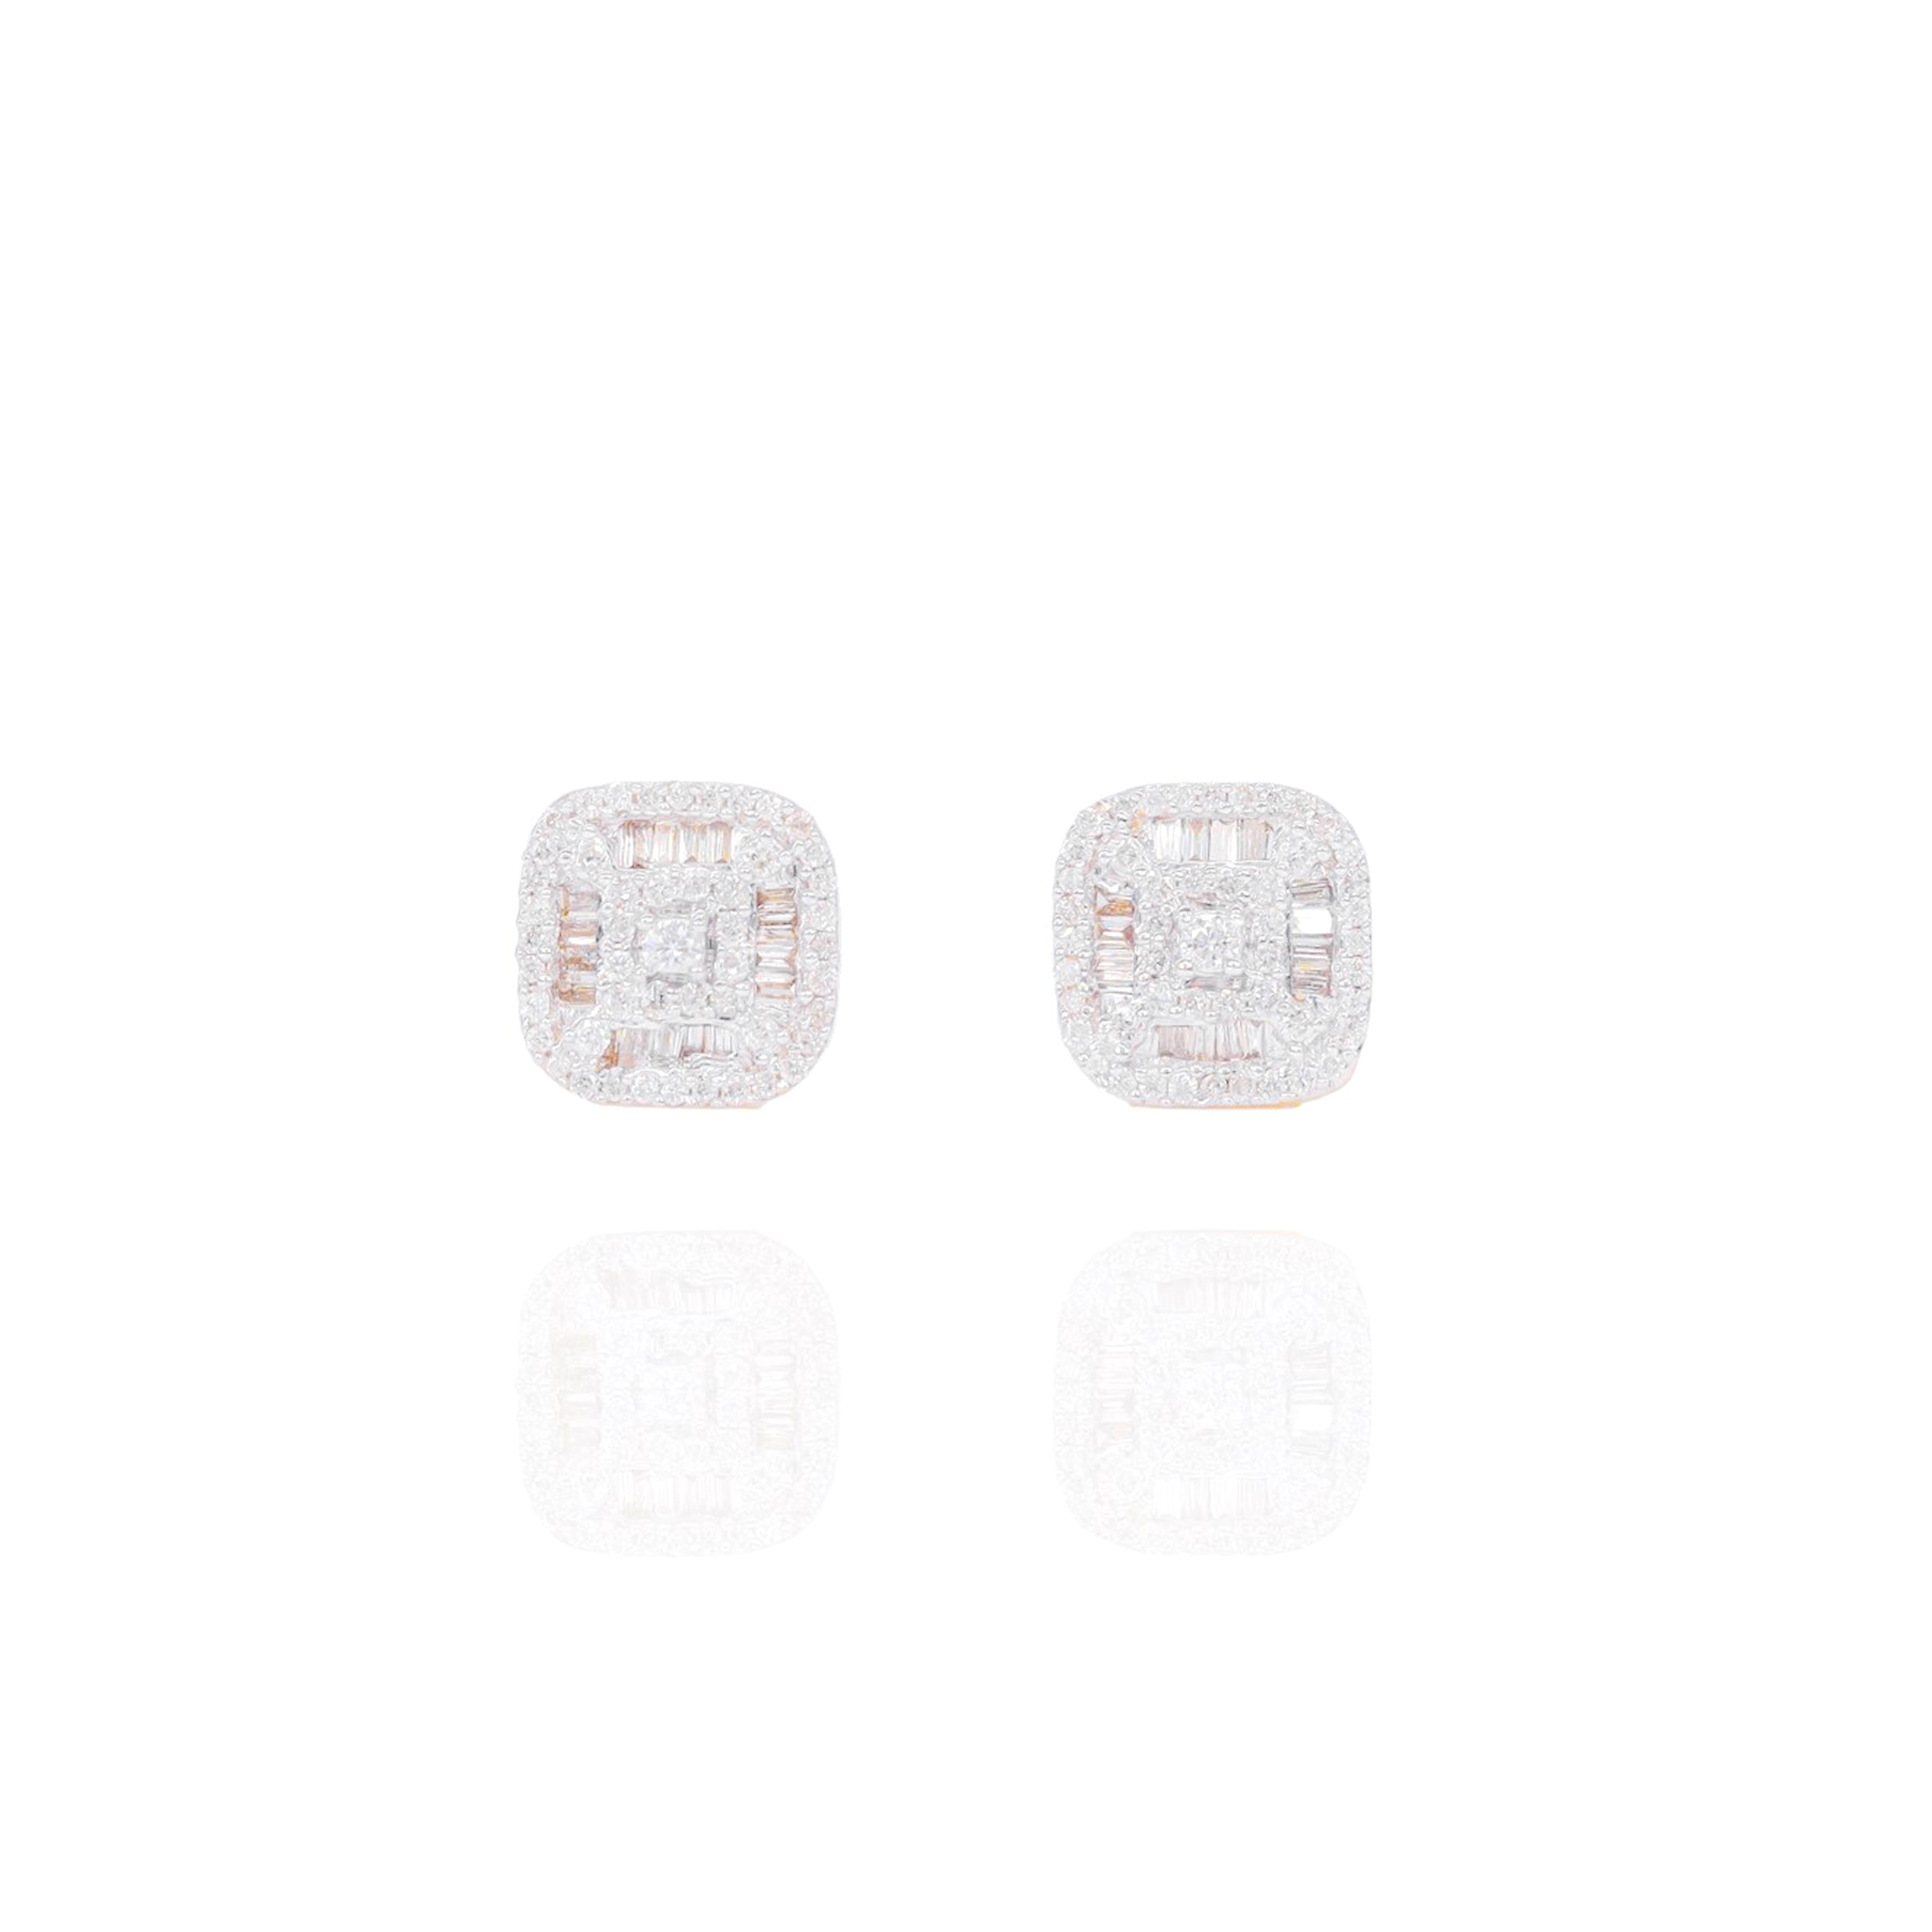 Rounded Square Baguette & Round Diamond Earrings